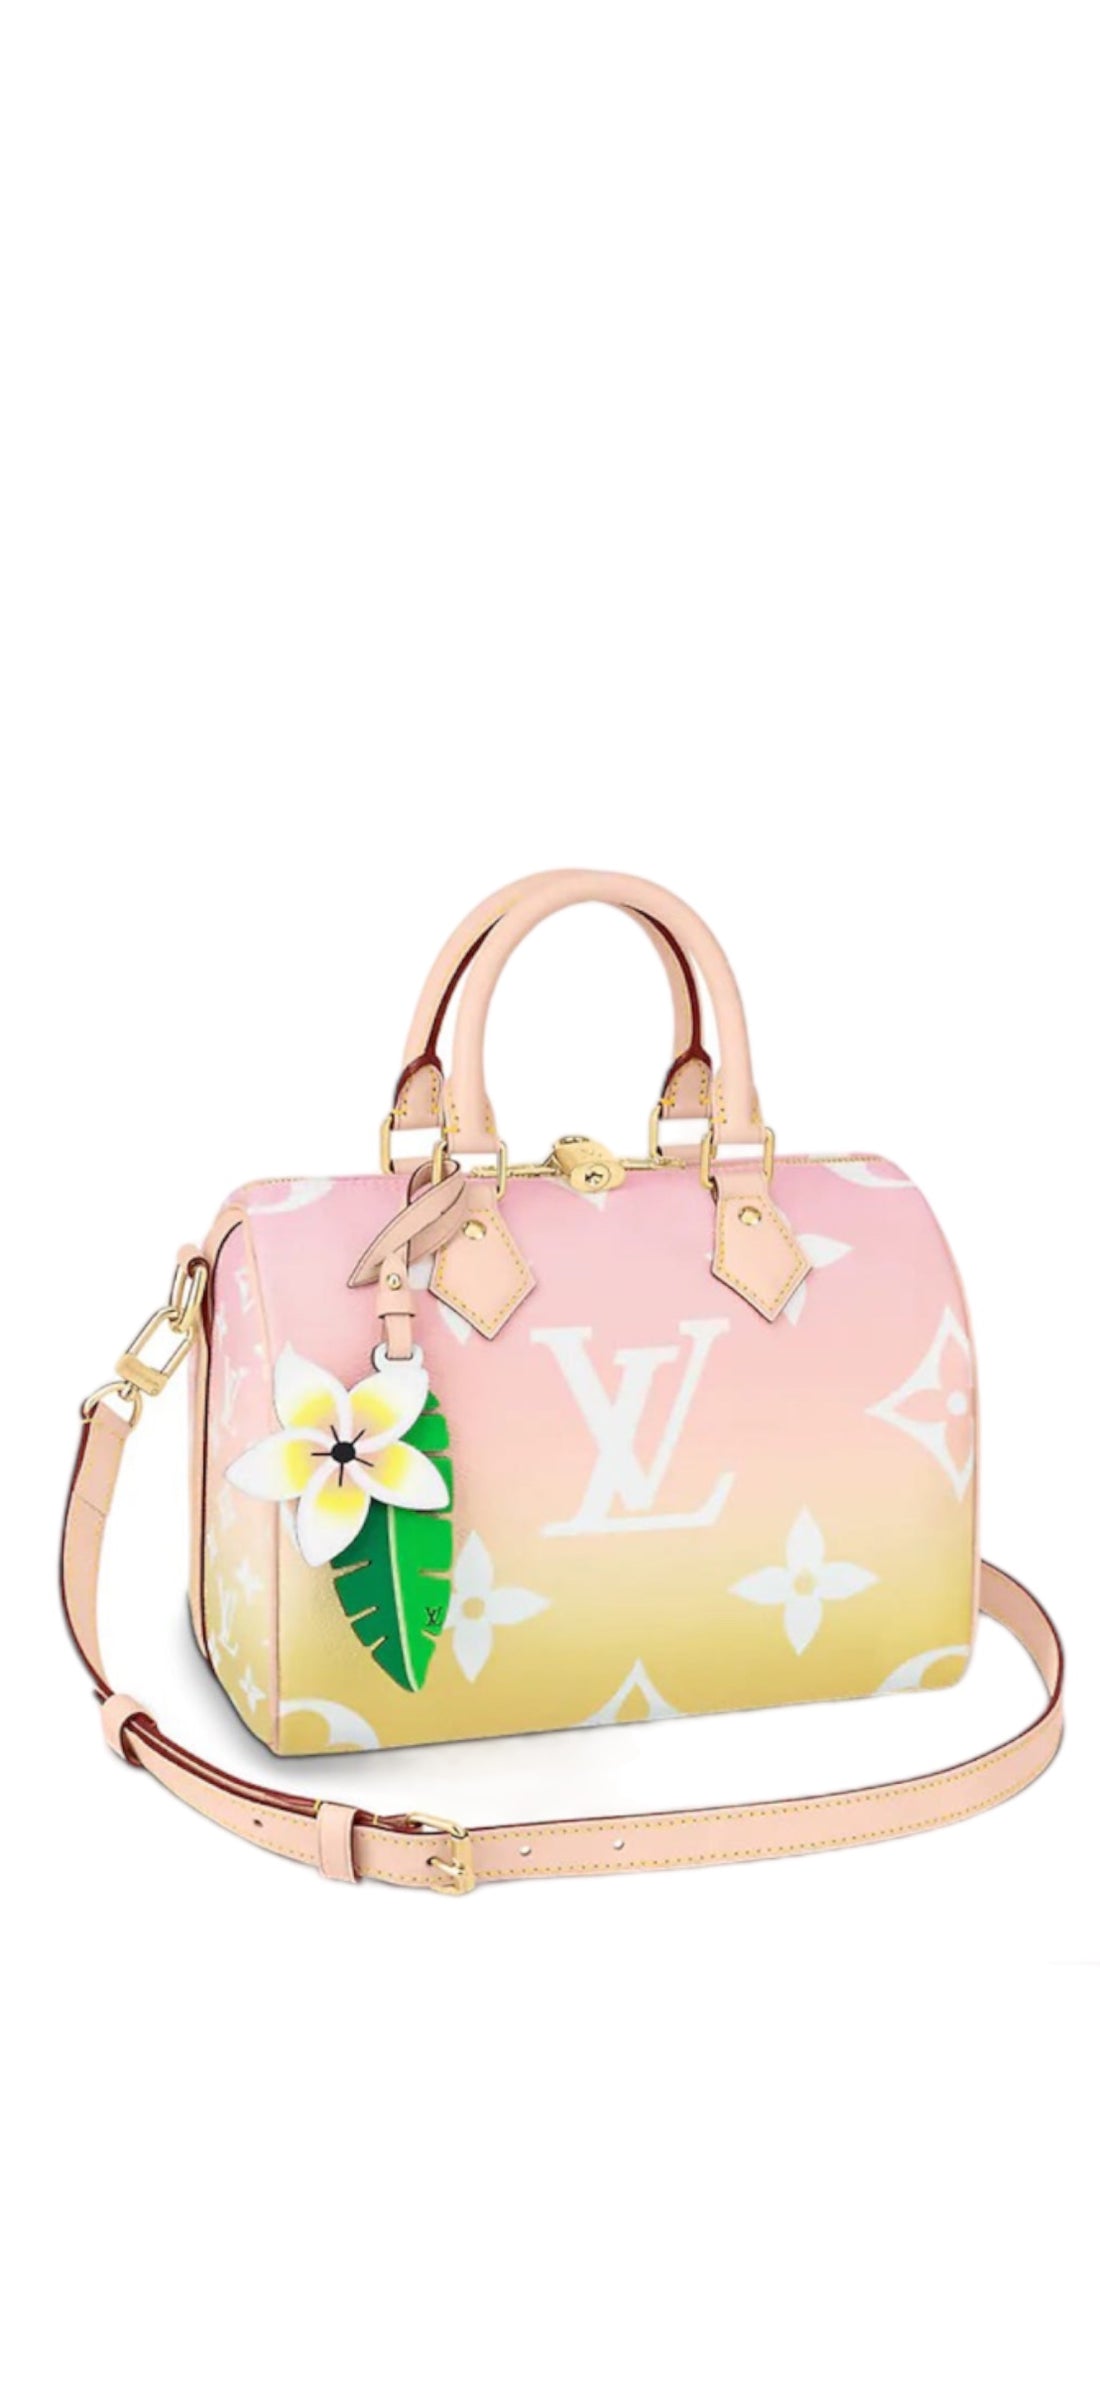 Louis Vuitton Speedy 25 Bandouliere Rose "by the pool"